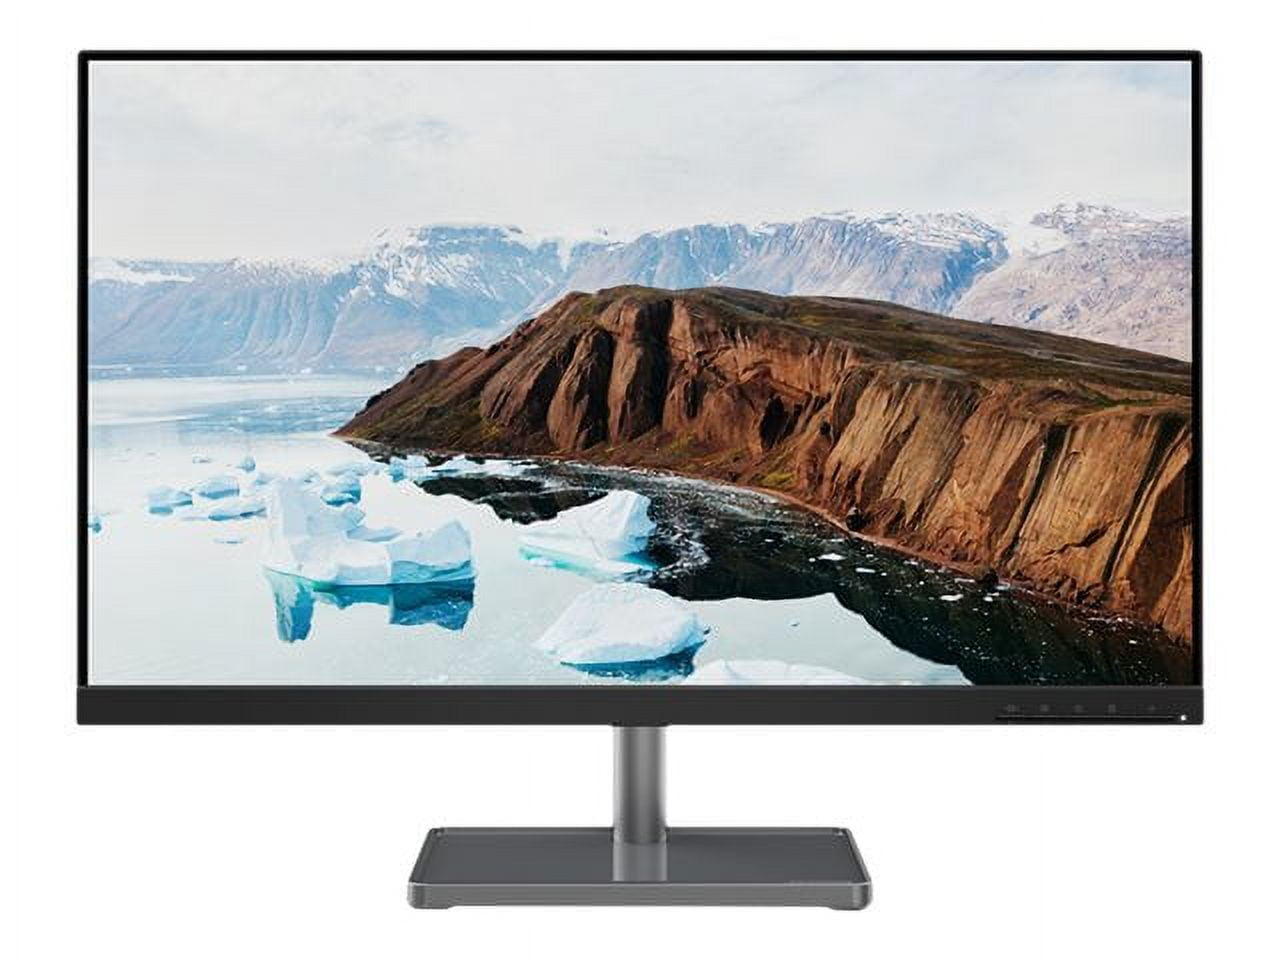 Écran PC Lenovo L27i-40 27 inch FHD Gaming Monitor (IPS Panel, 100Hz, 4ms,  2xHDMI, VGA, FreeSync, Speakers, Phone Holder) - Tilt Stand - DARTY  Martinique